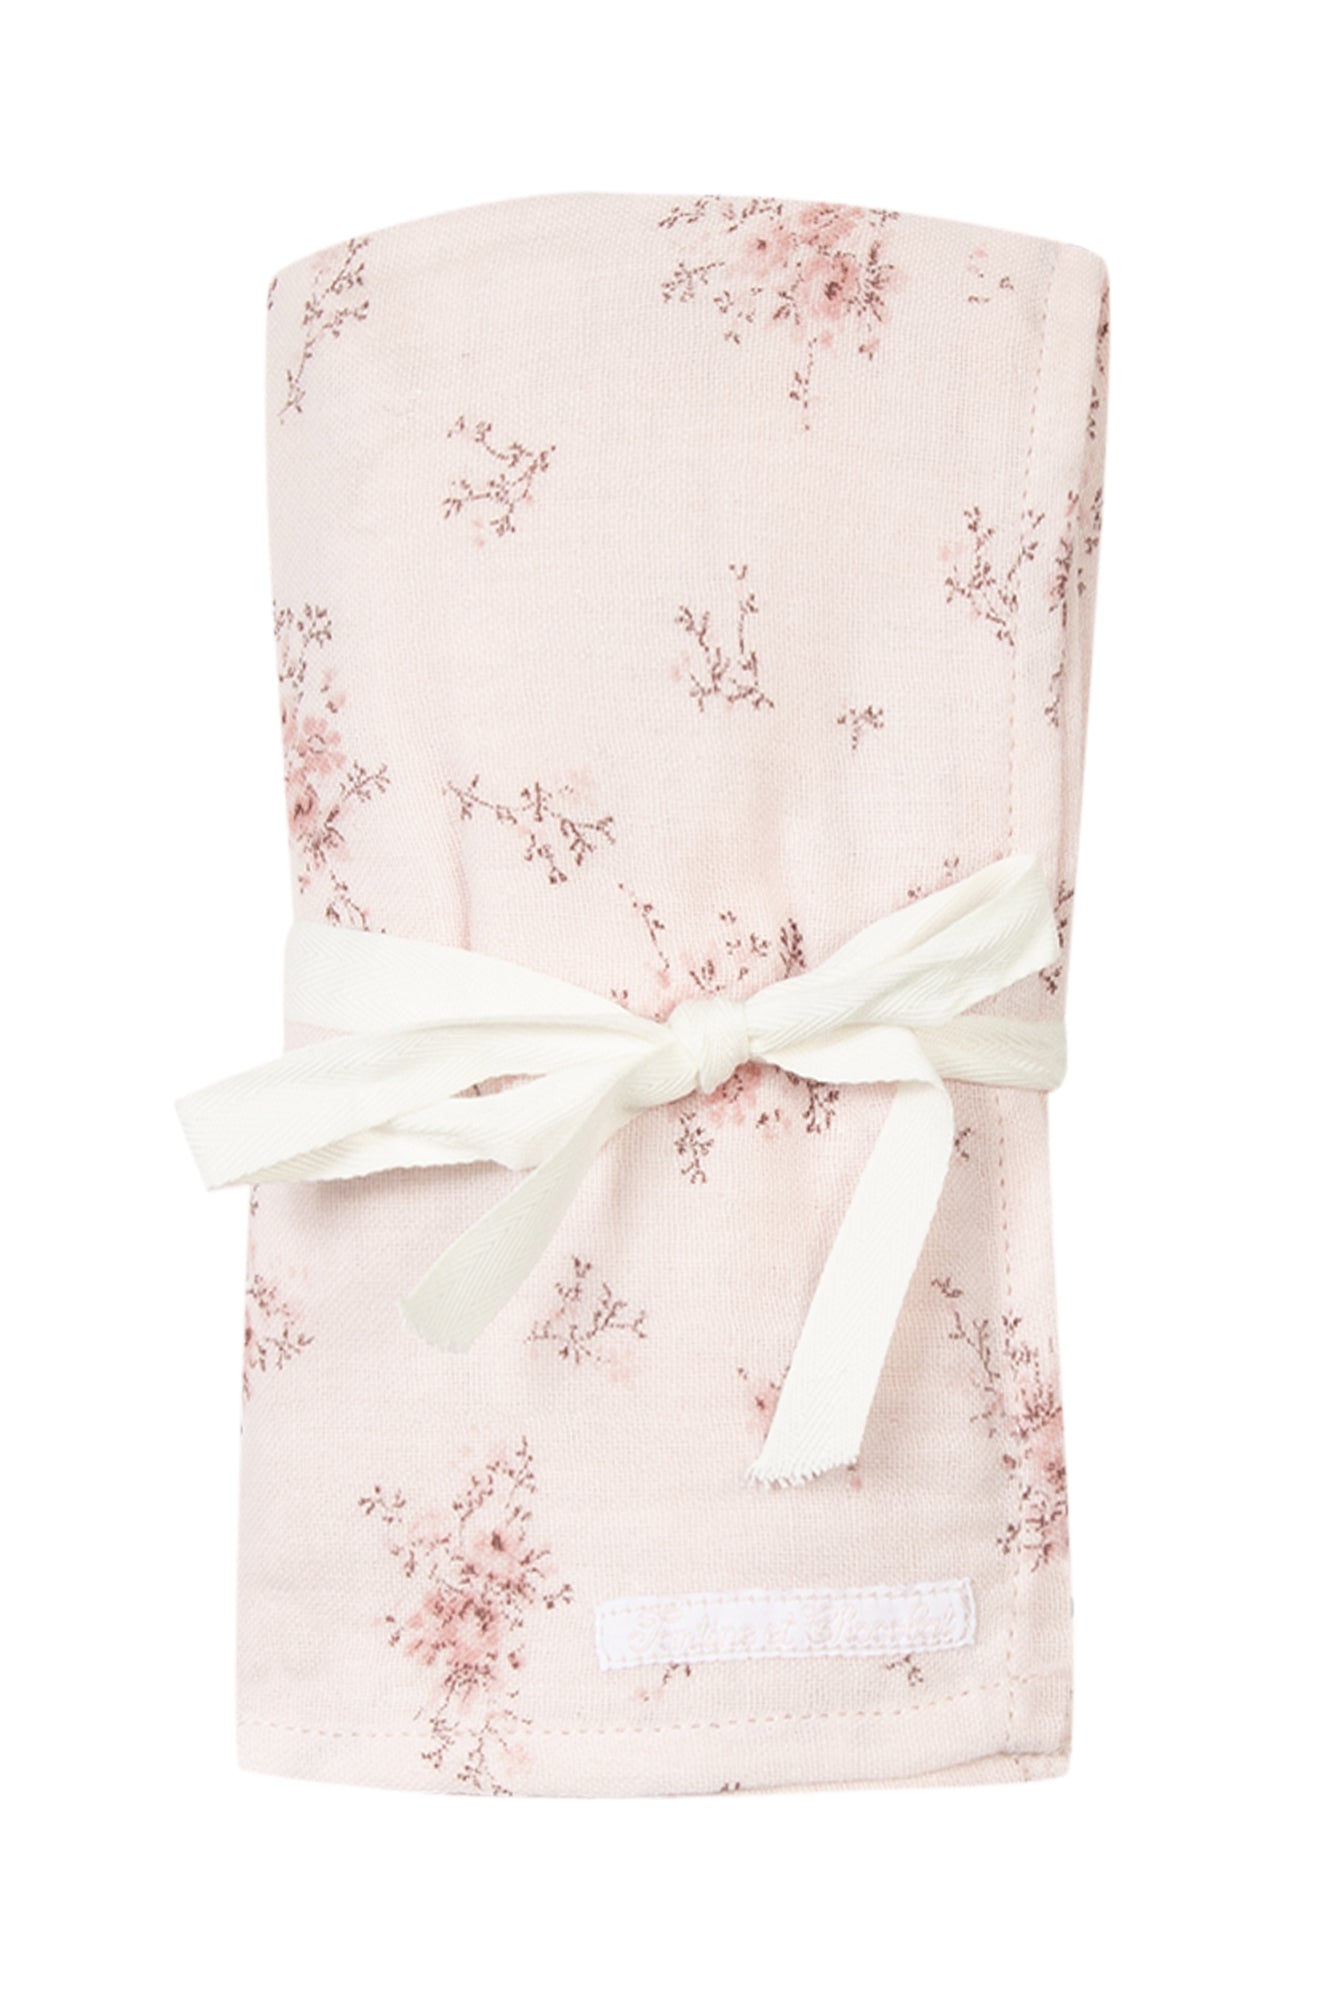 Muslin - Pale pink with floral print - Tartine Et Chocolat